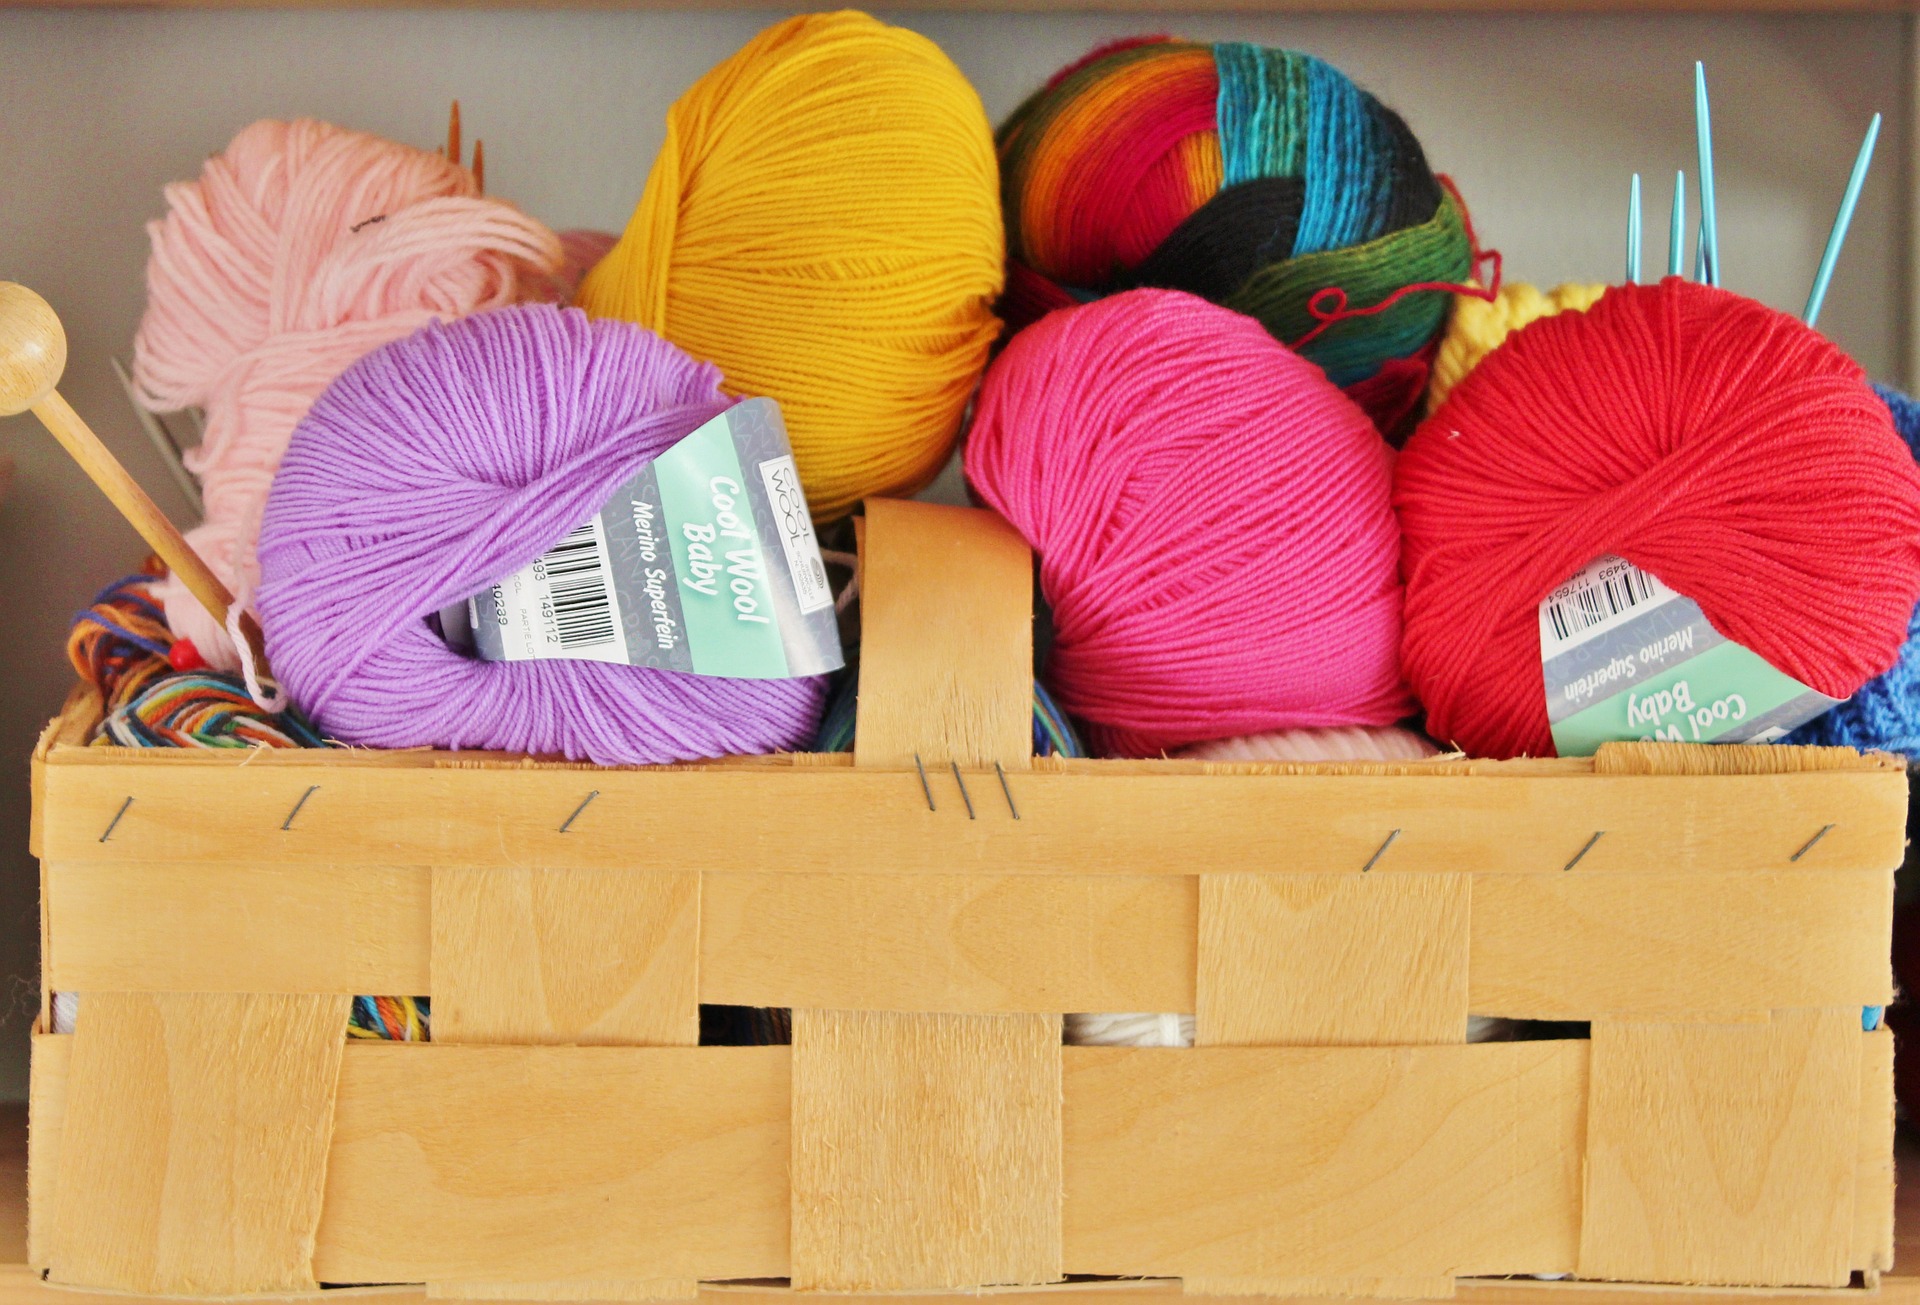 Colorful skeins of yarn in a basket.